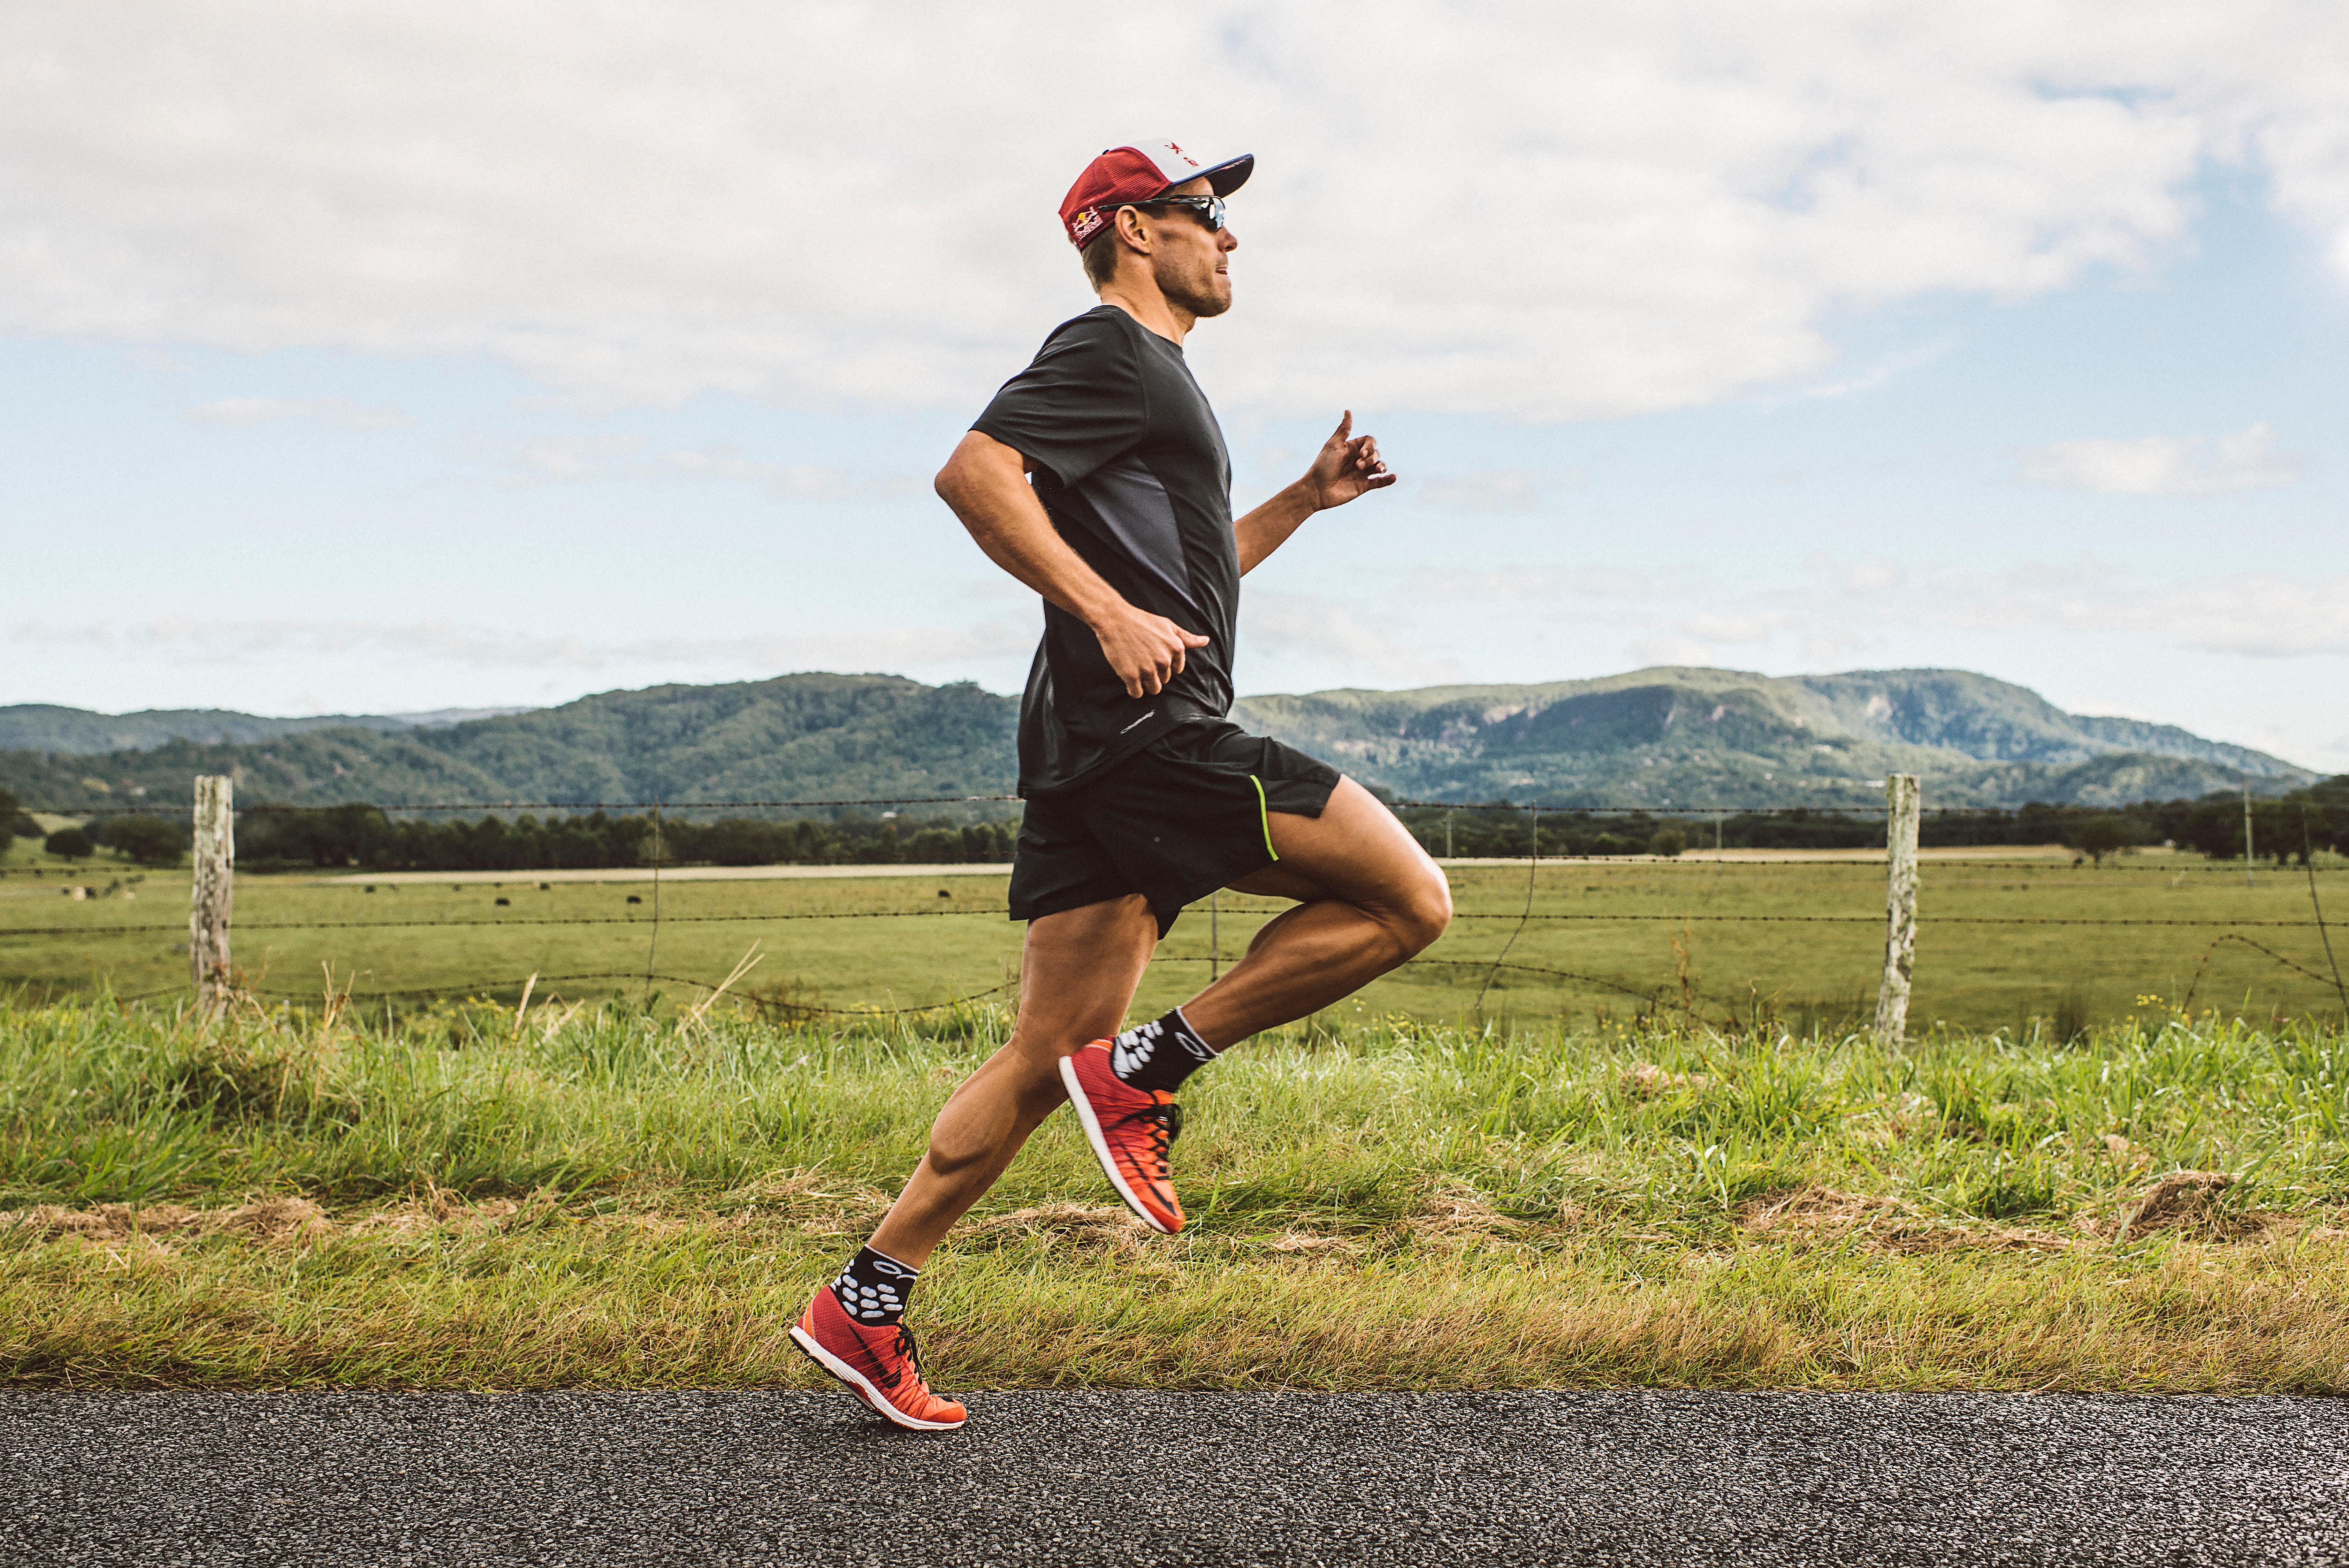 Running Shoes You Need According To 5 Elite Runners